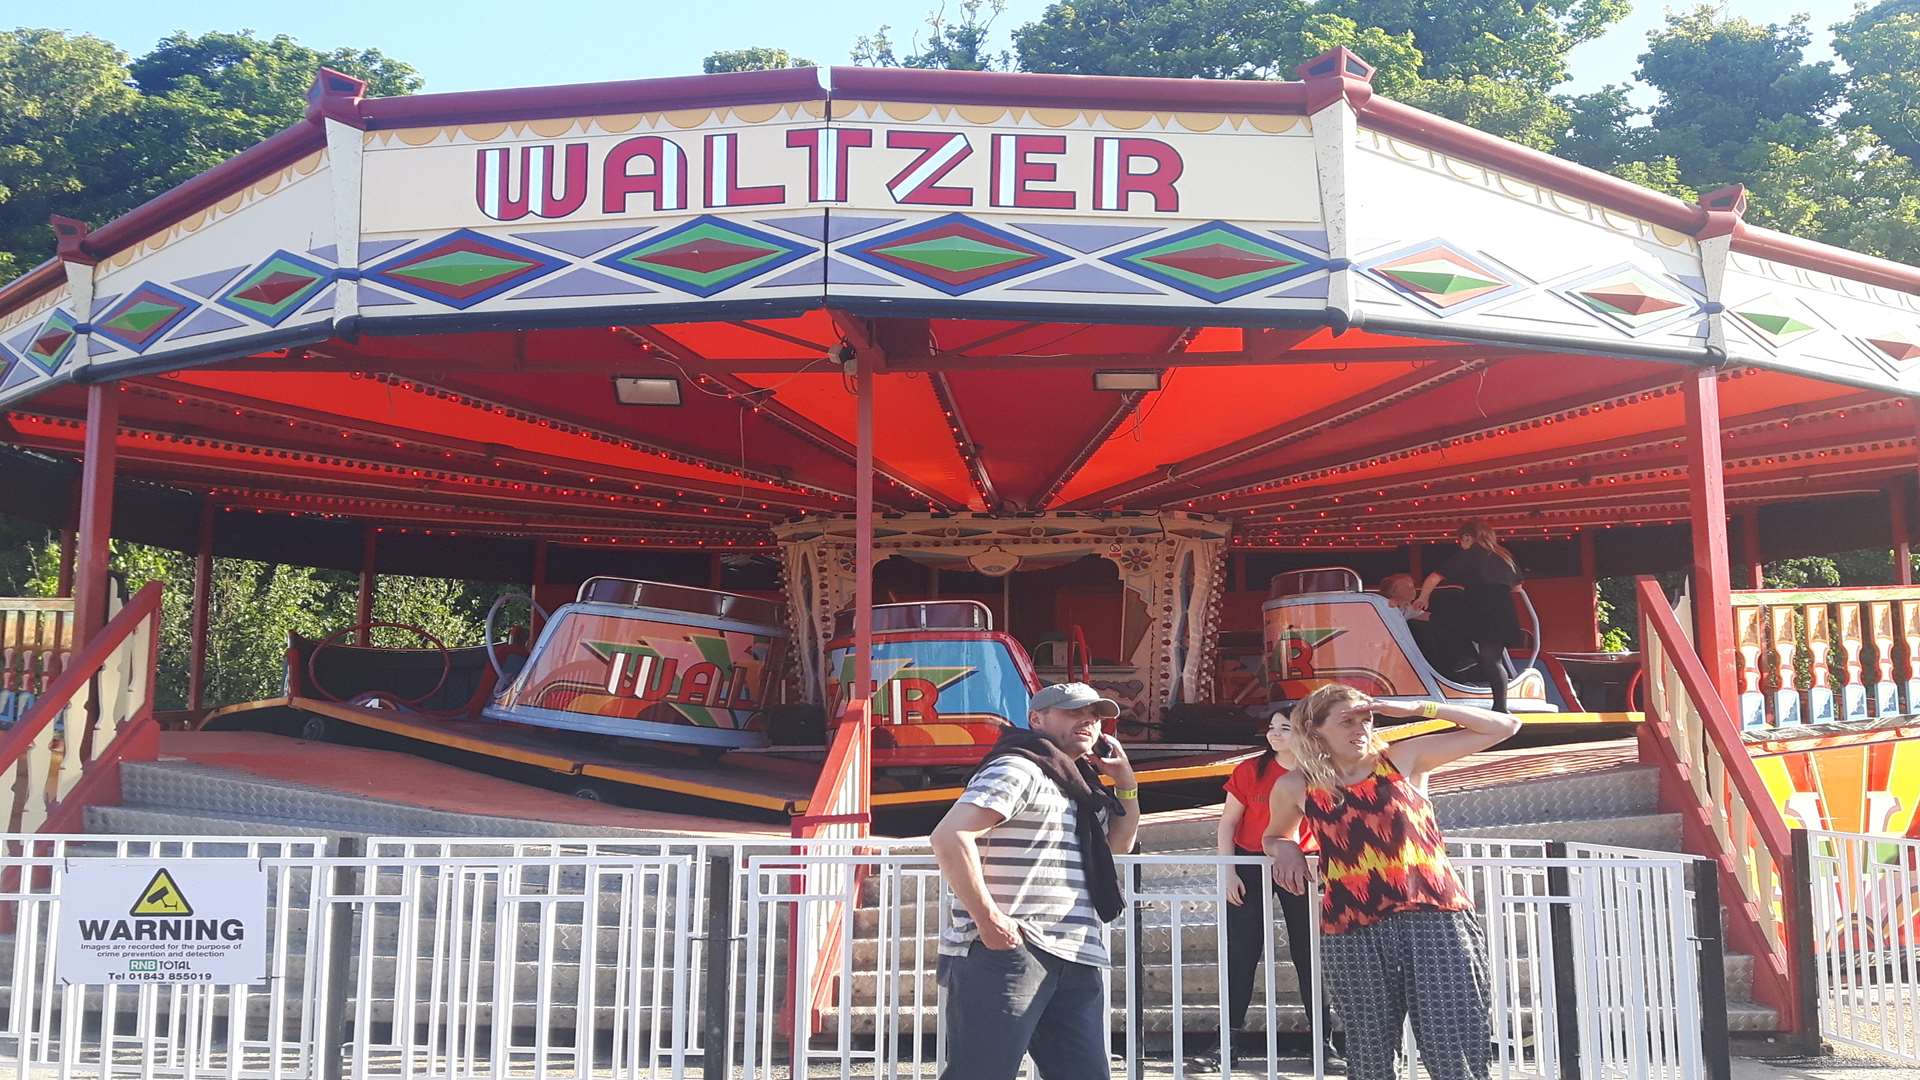 The Waltzer should be a huge attraction